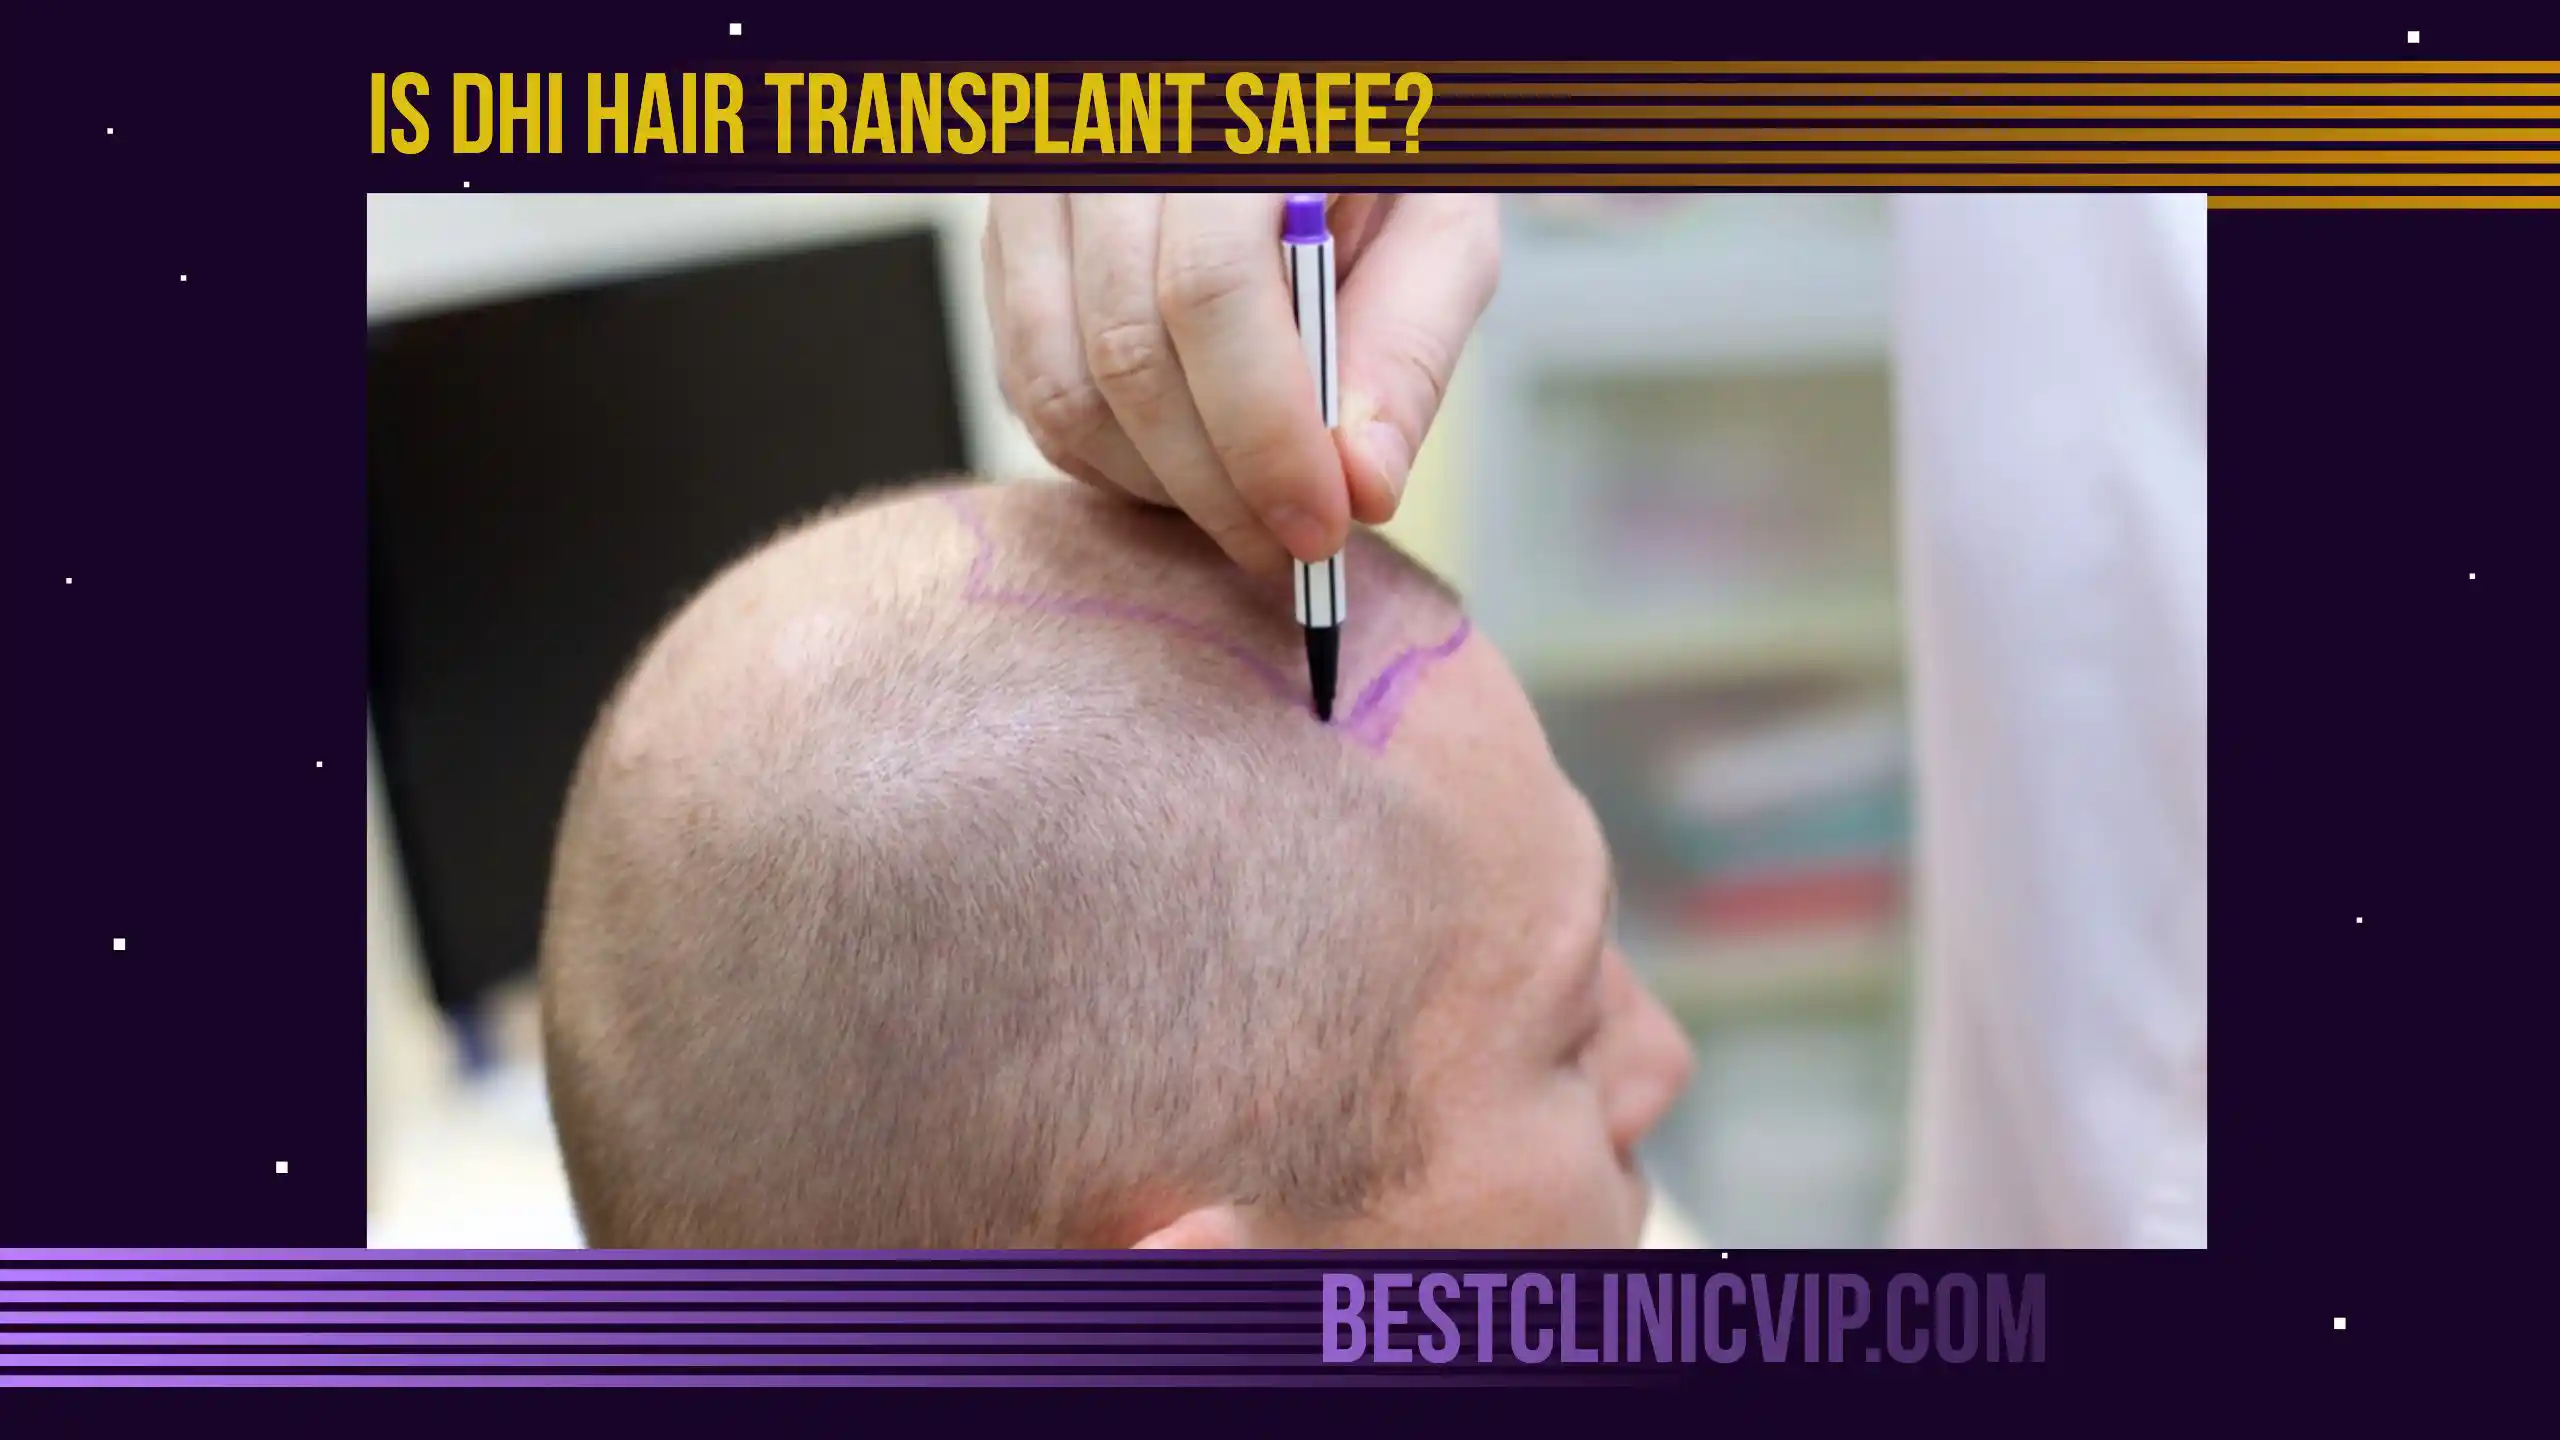 Is DHI hair transplant safe